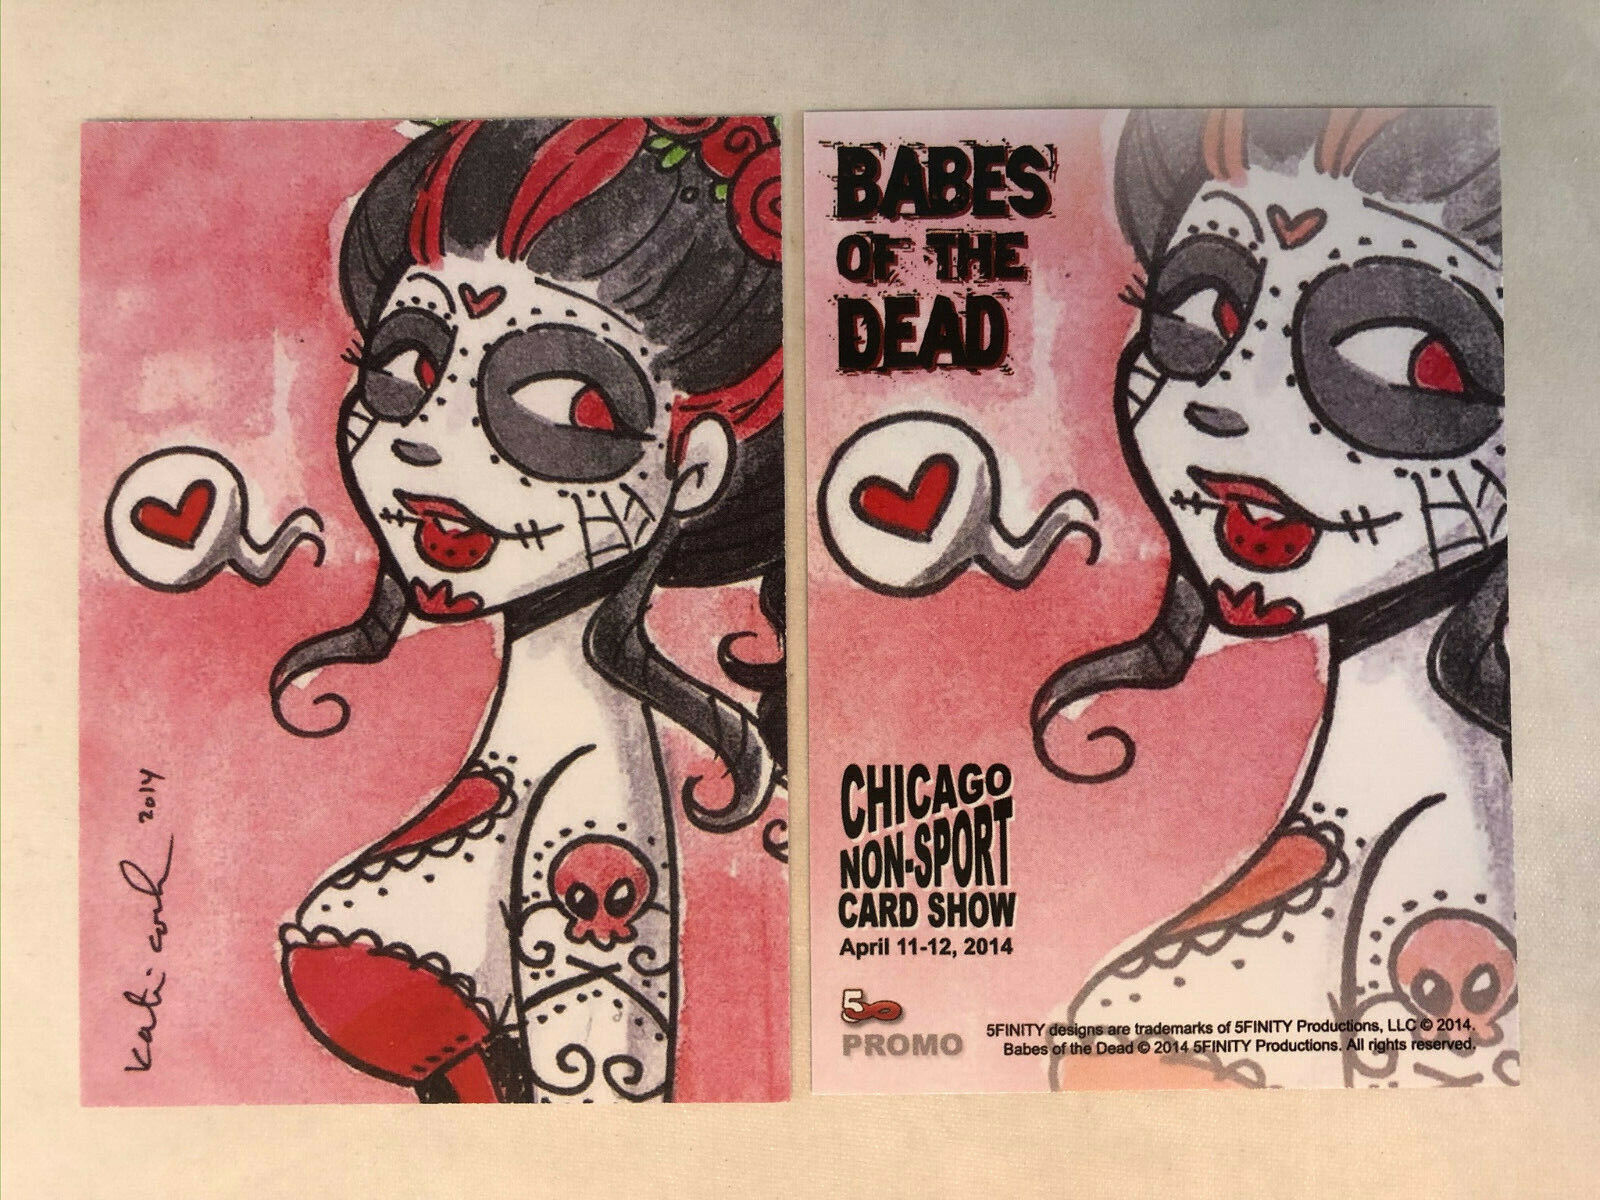 CHEAP PROMO CARD: BABES OF THE DEAD 5finity Chicago Show 2014 Katie Cook